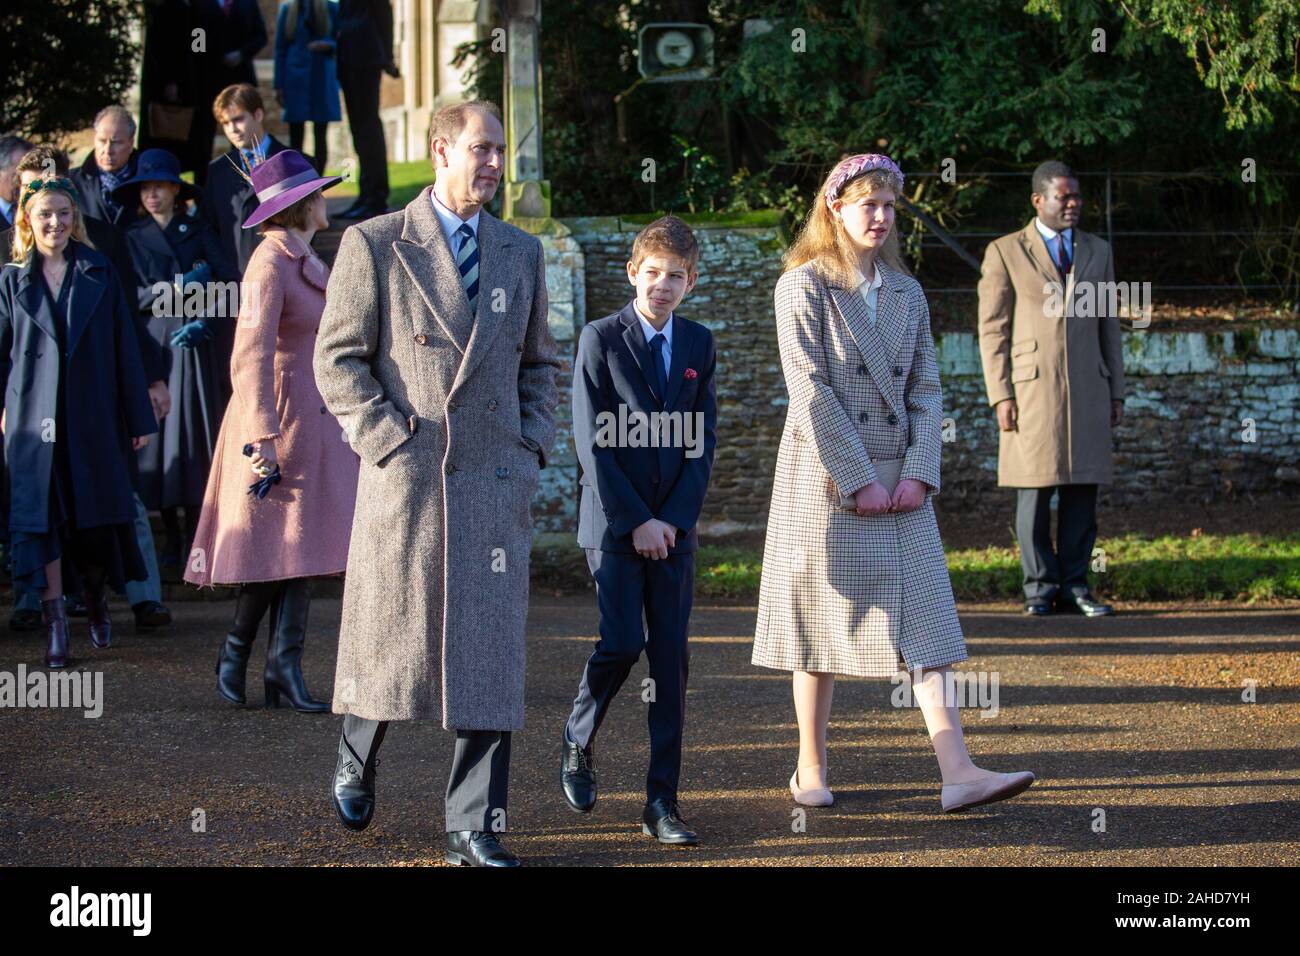 Picture dated December 25th shows Prince Edward  and children James, Viscount Severn and Lady Louise Windsor at the Christmas Day morning church service at St Mary Magdalene Church in Sandringham, Norfolk.   Prince Andrew kept a low profile as members of the Royal Family attended Christmas Day church services in Sandringham in Norfolk. While a large crowd watched the Queen and family members arrive for the main 11am service, the prince attended an earlier service. Prince Andrew was also absent as family members left the church after the service to greet members of the public. Prince Philip, wh Stock Photo